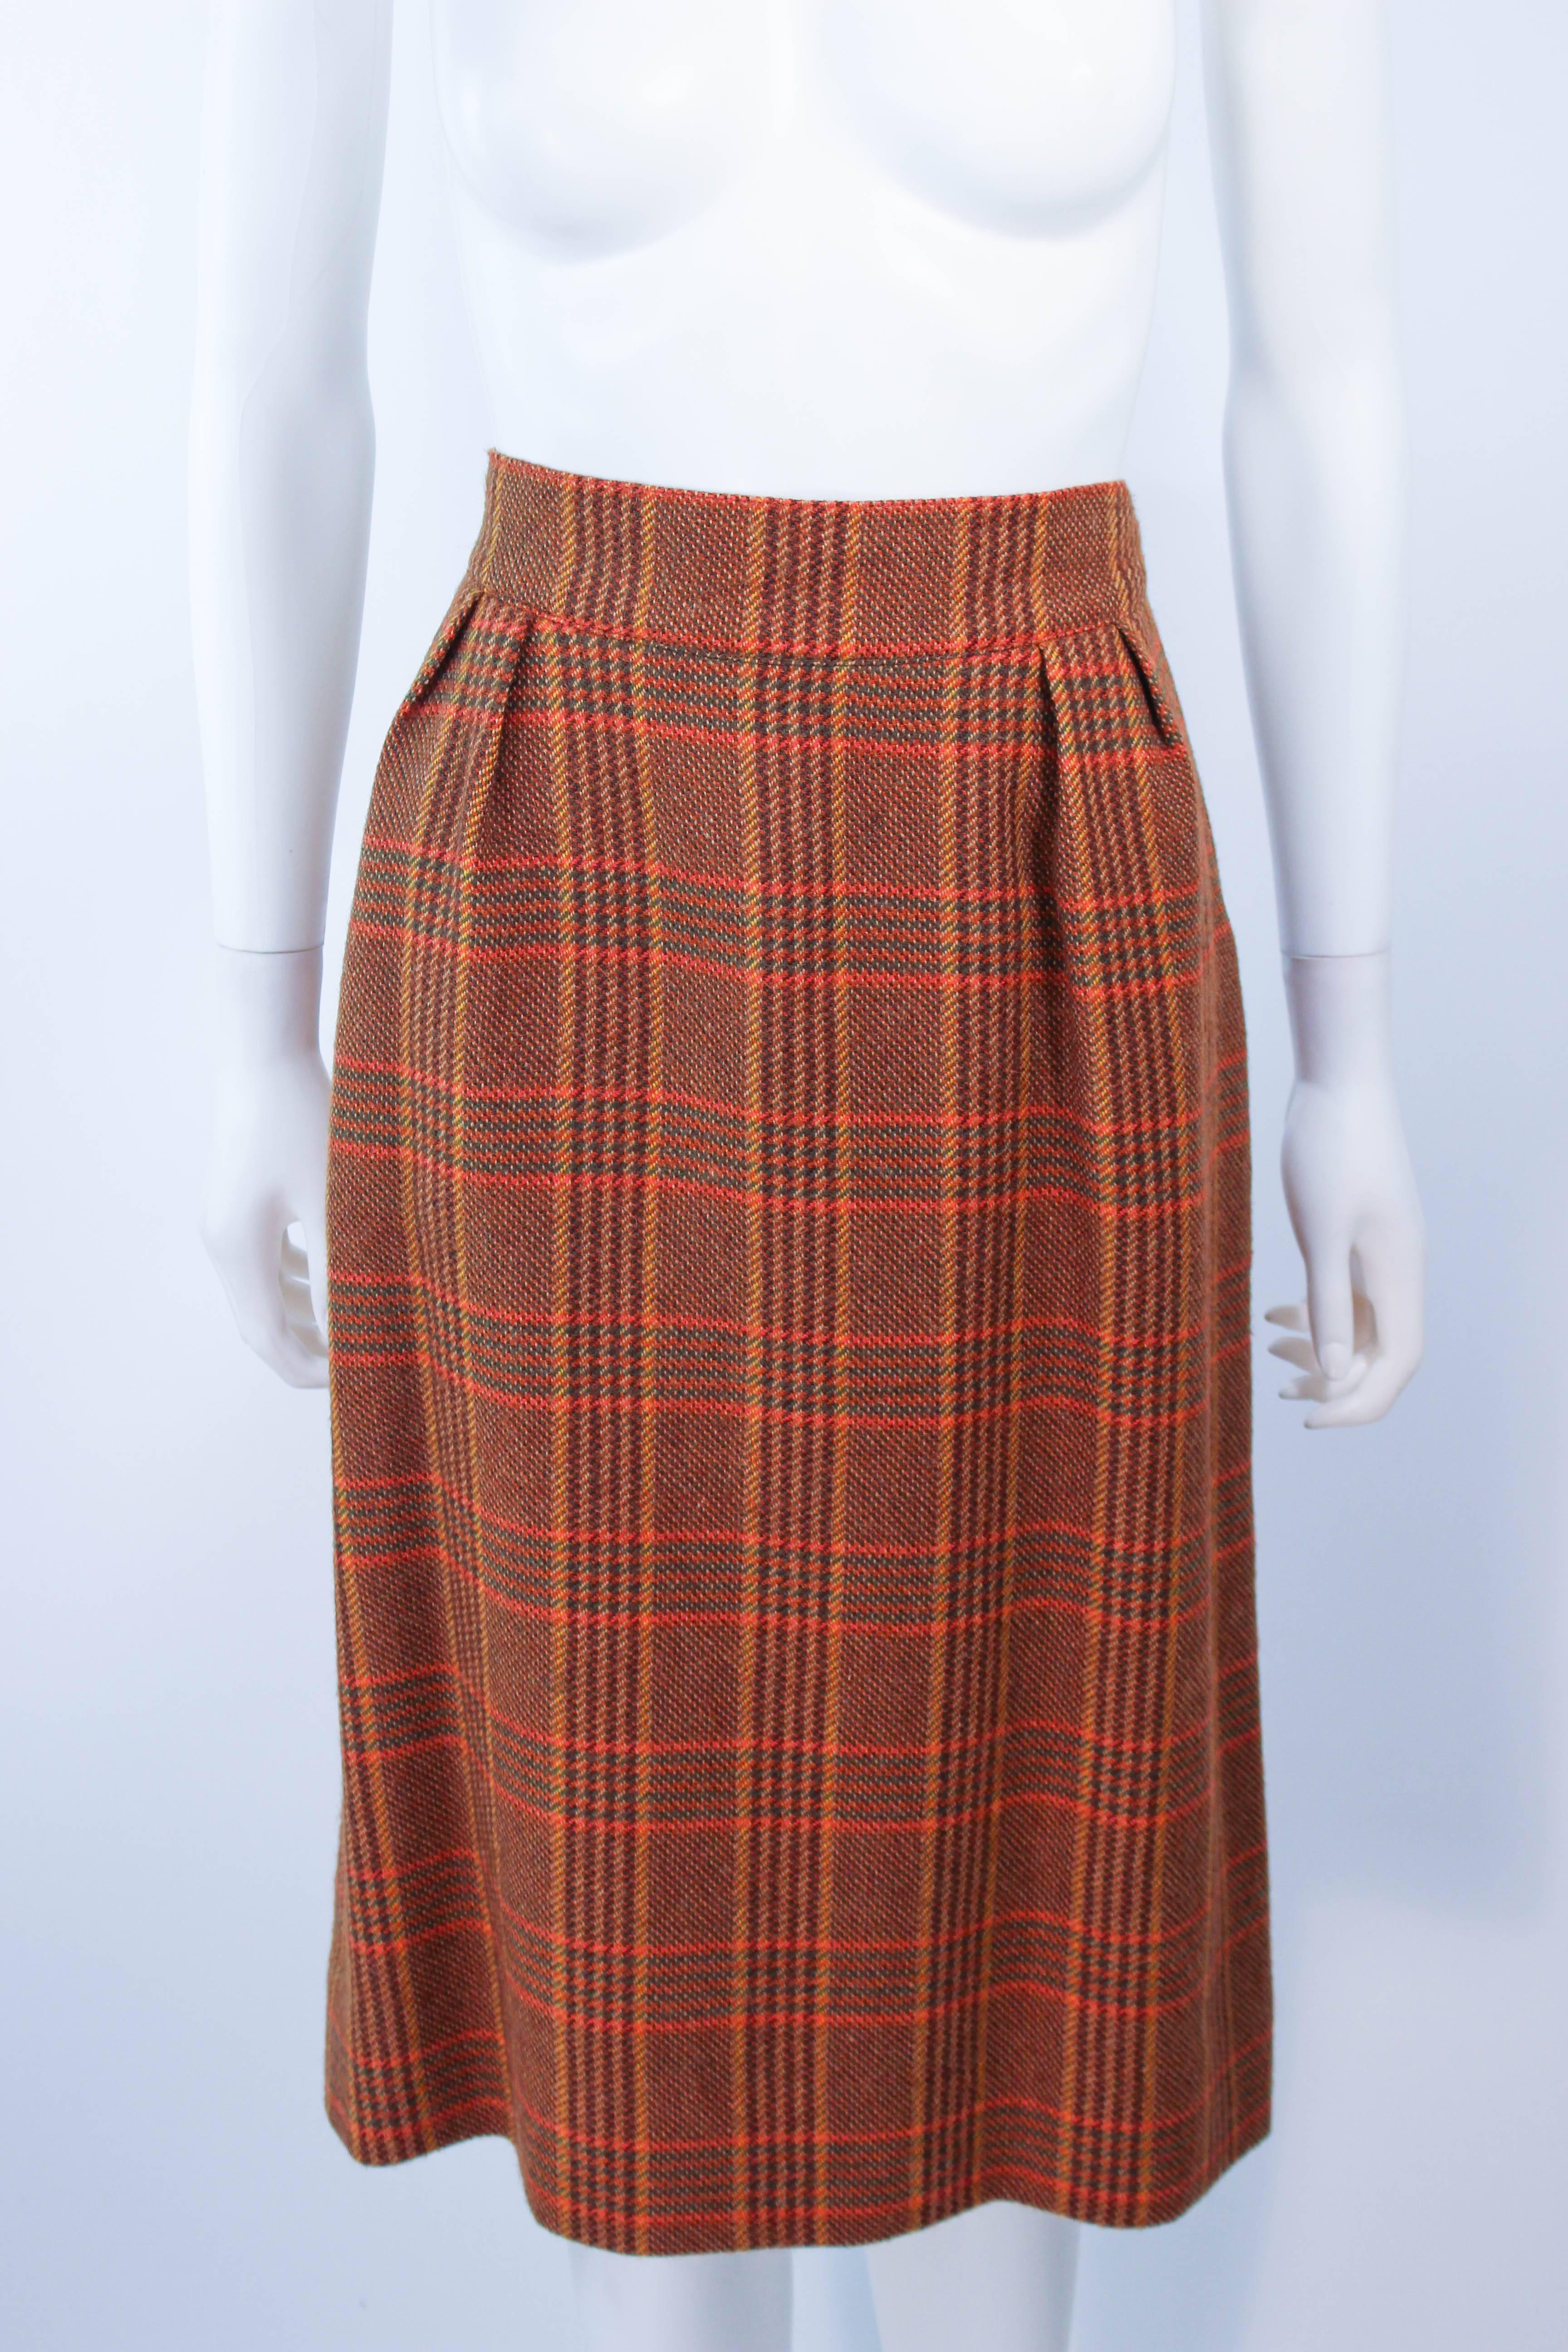 HERMES Brown Plaid Skirt Suit Size 46 For Sale 2